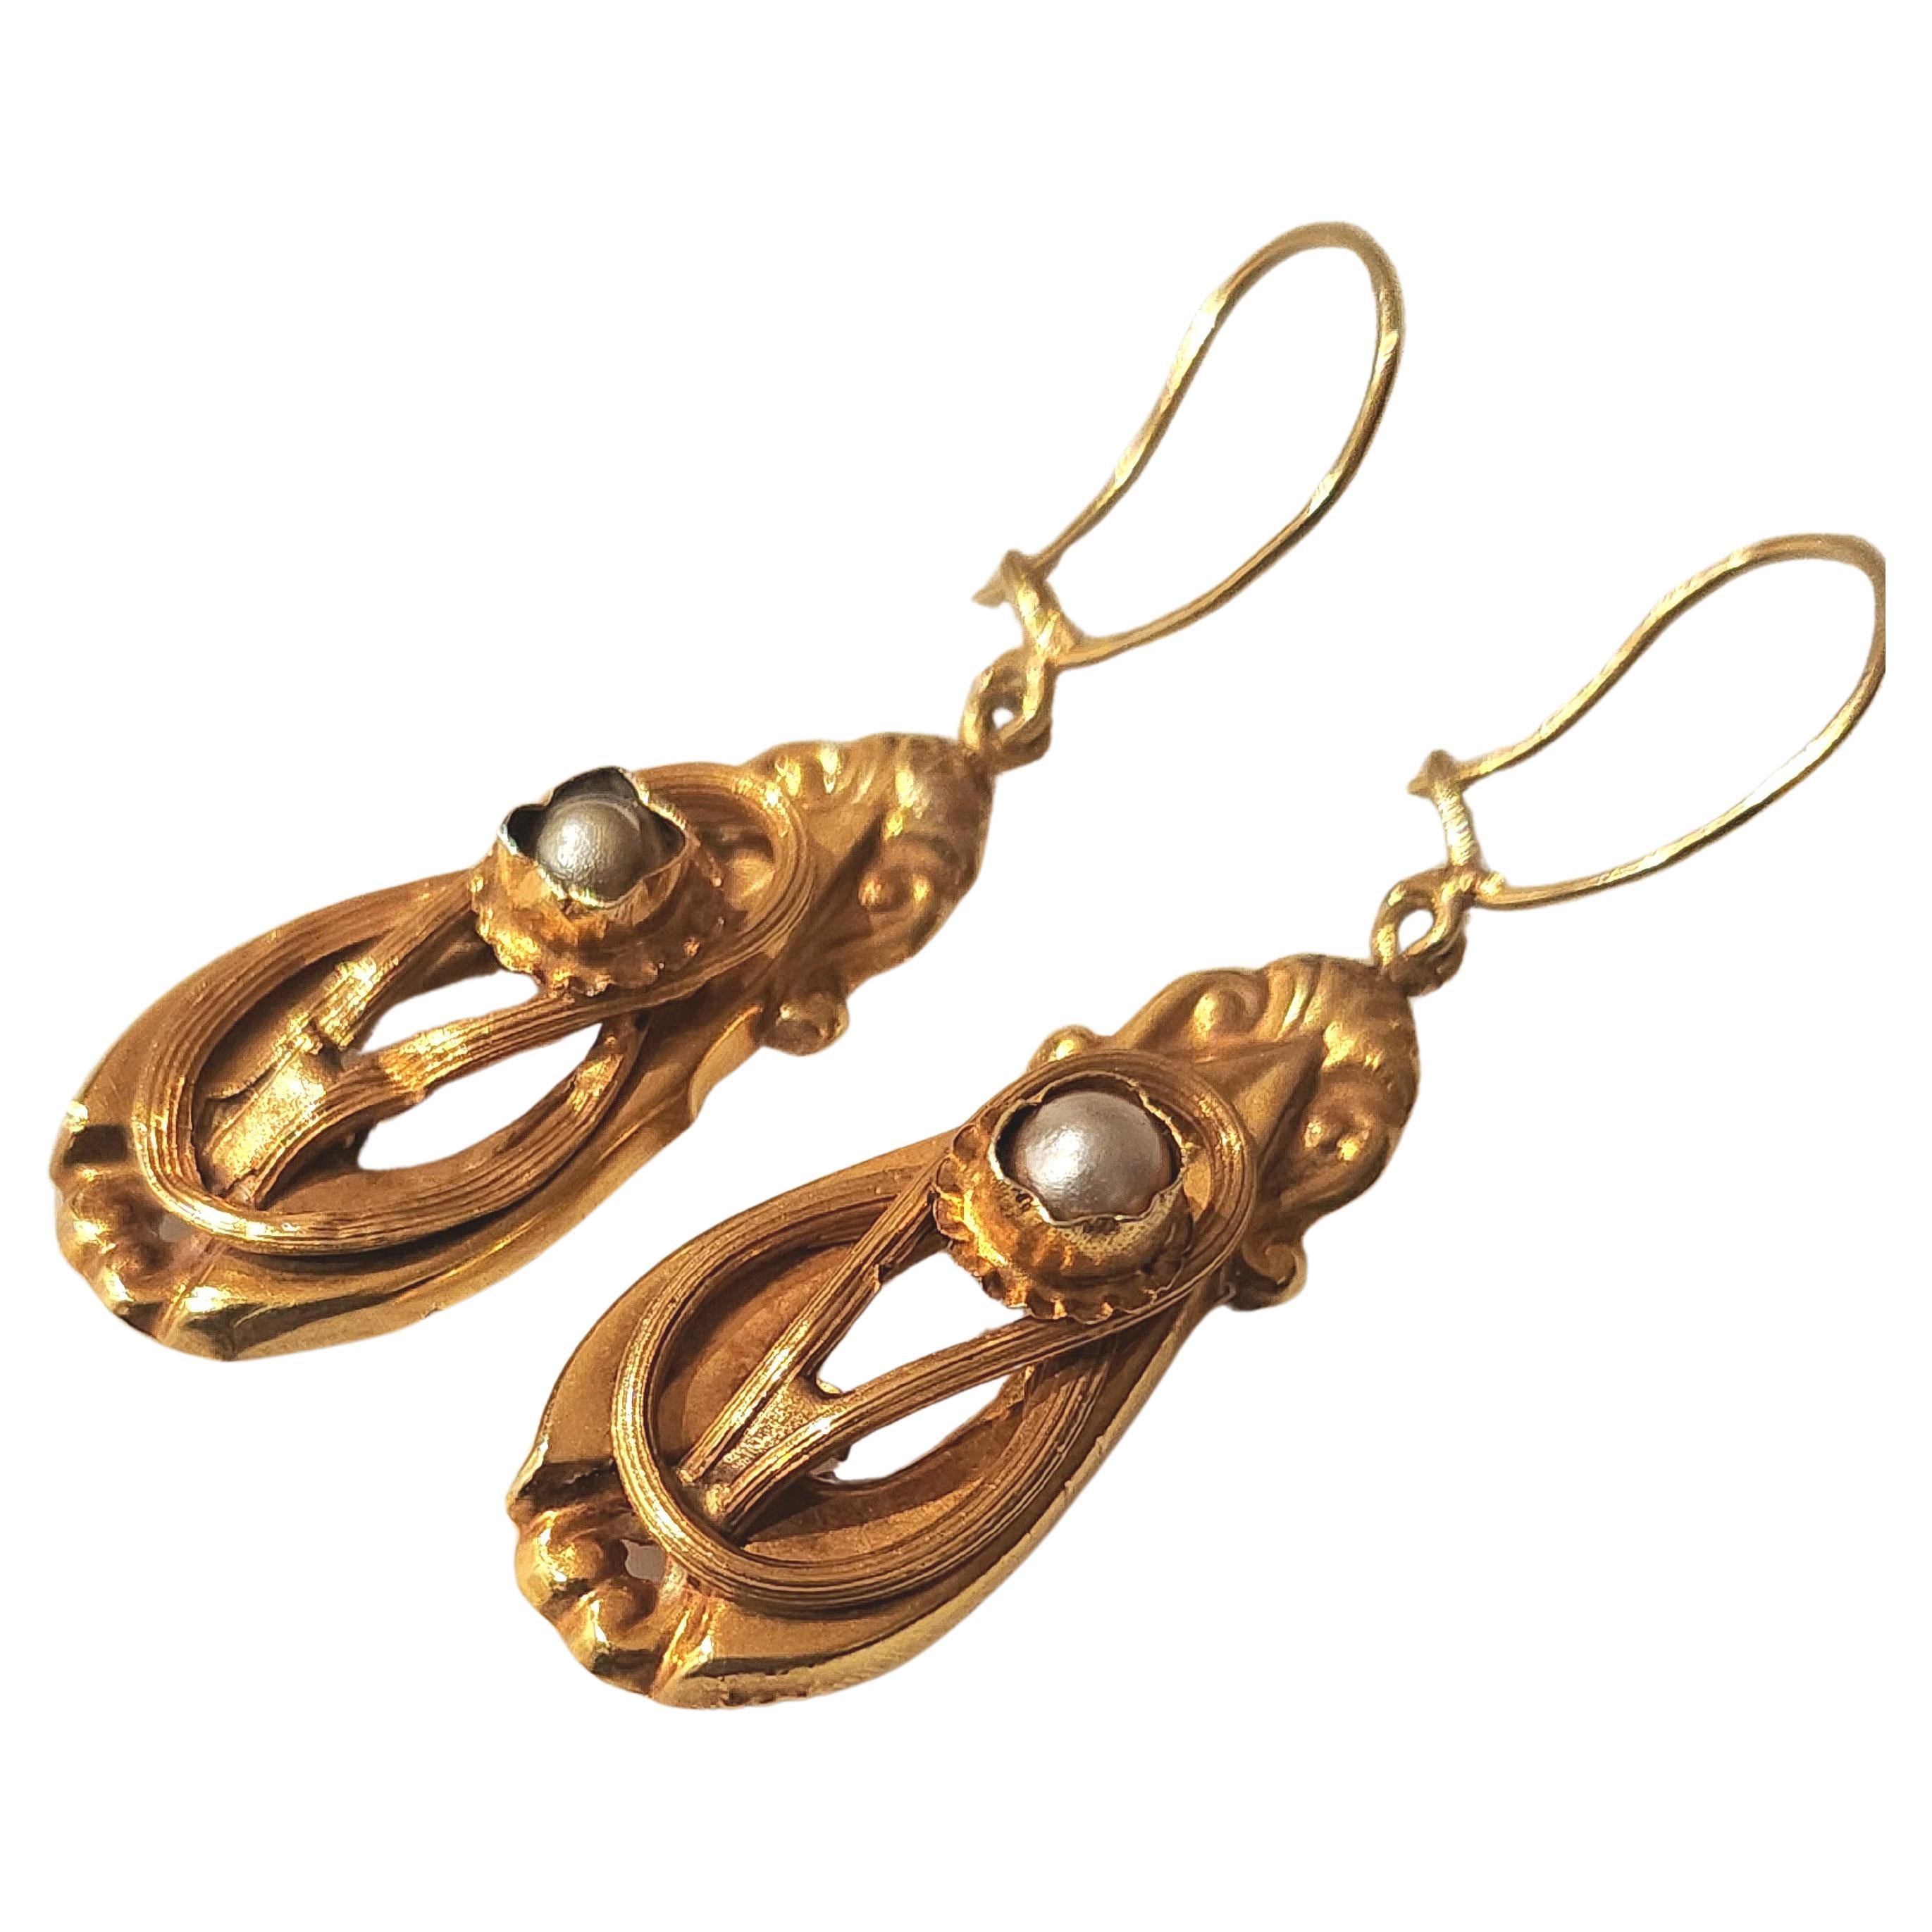 Antique 18k yellow gold biedermeier era early 19th century dangling earrings centered with 2 natural pearls with a total lenght of 5cm (earrings were gold tested 18k gold finest)